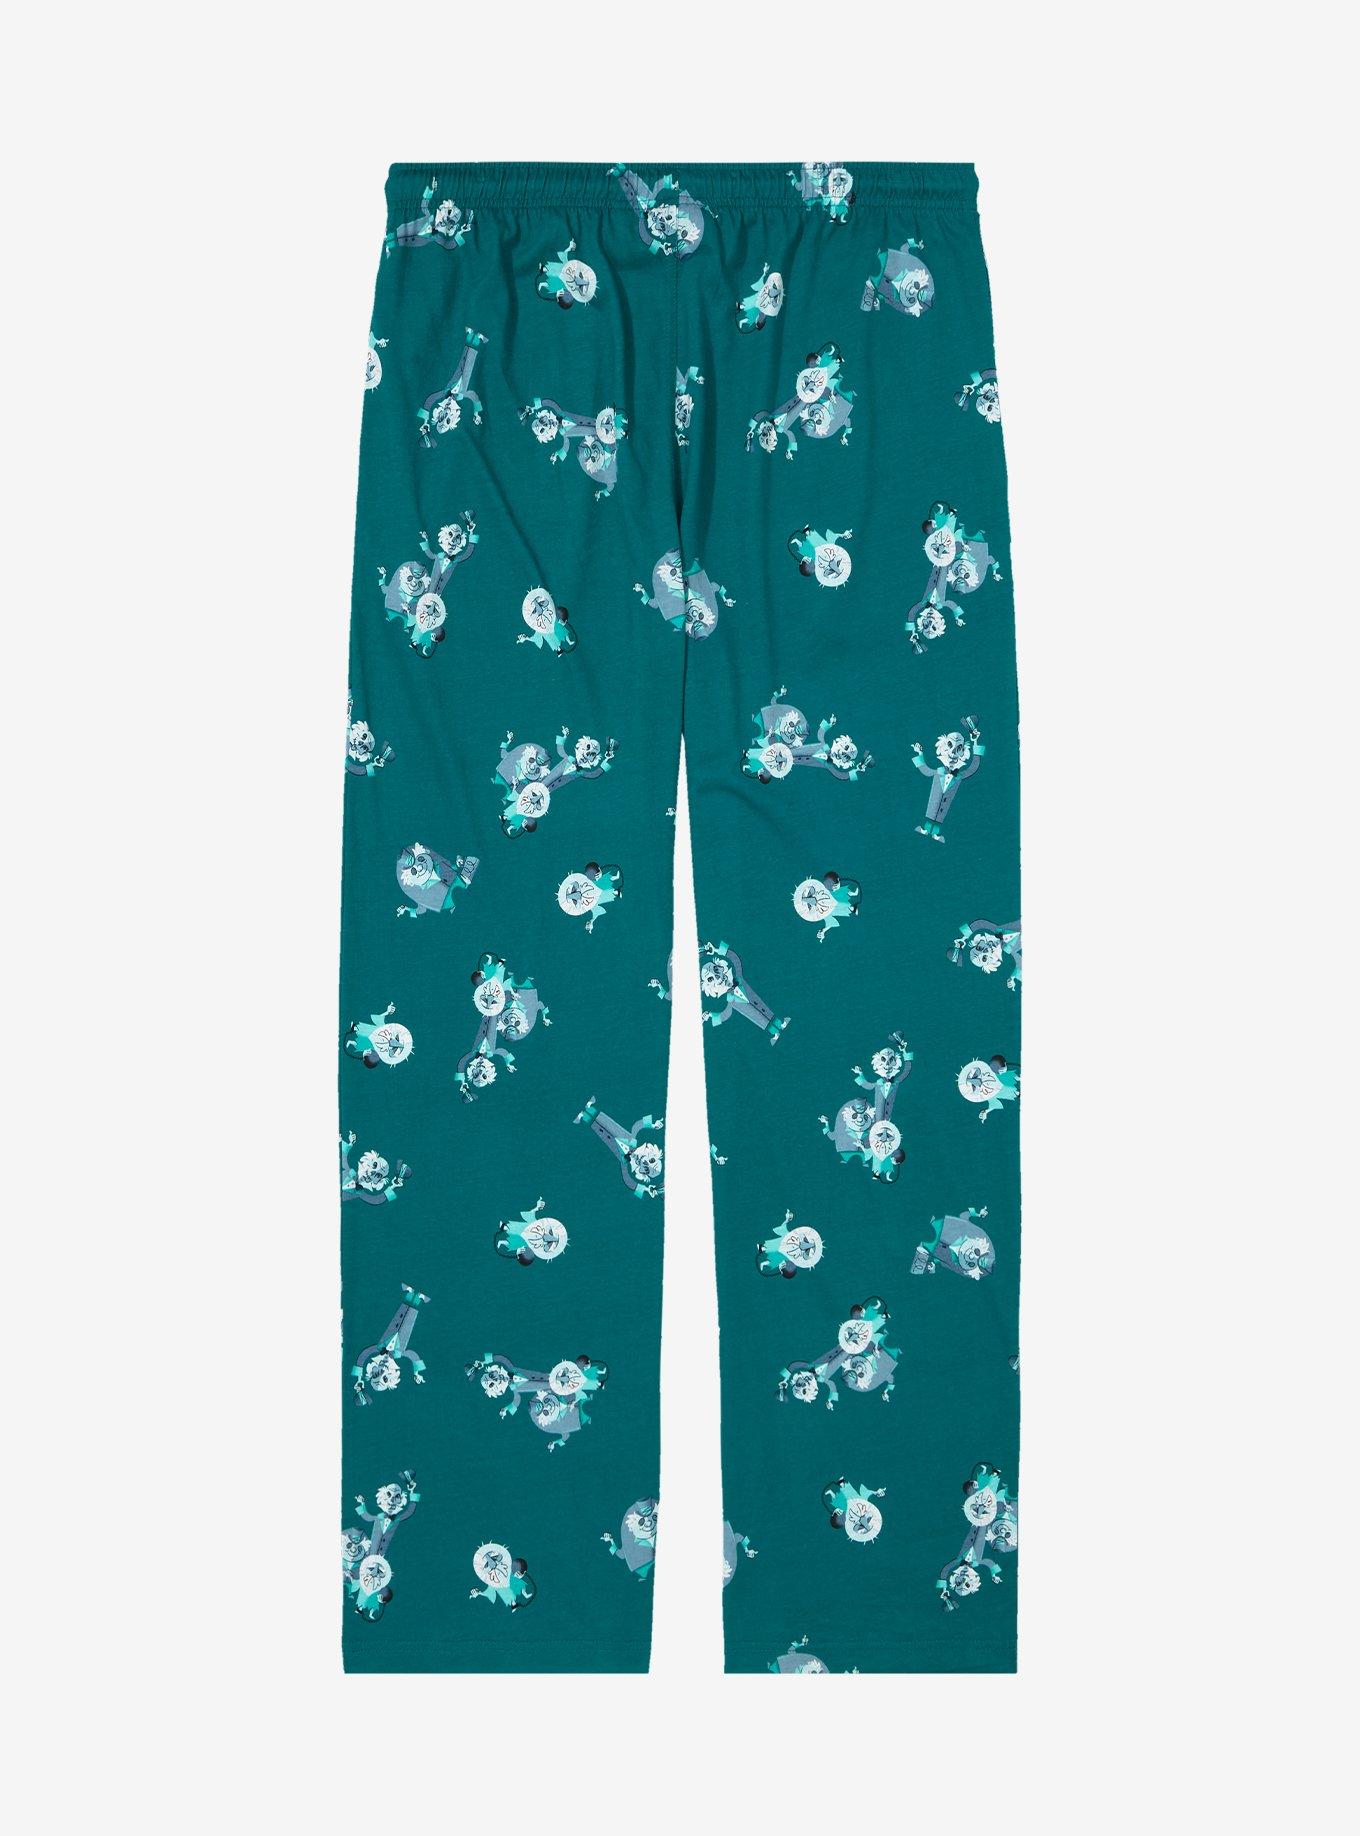 Disney The Haunted Mansion Hitchhiking Ghosts Allover Print Sleep Pants - BoxLunch Exclusive, FOREST GREEN, alternate